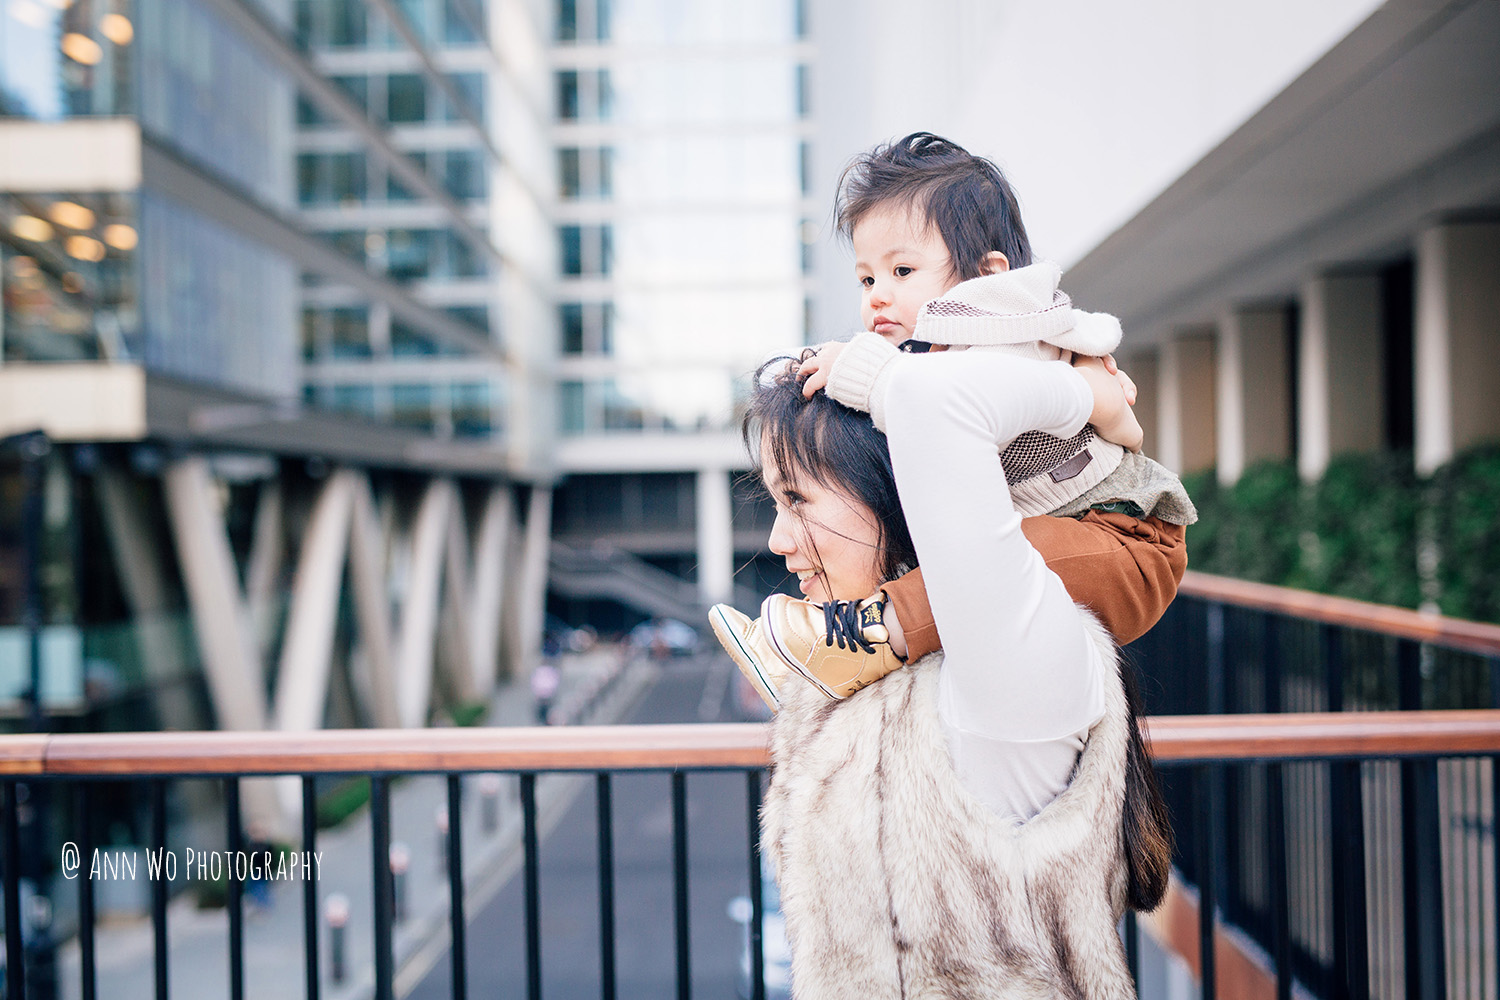 Lifestyle family photography in London - Ann Wo 